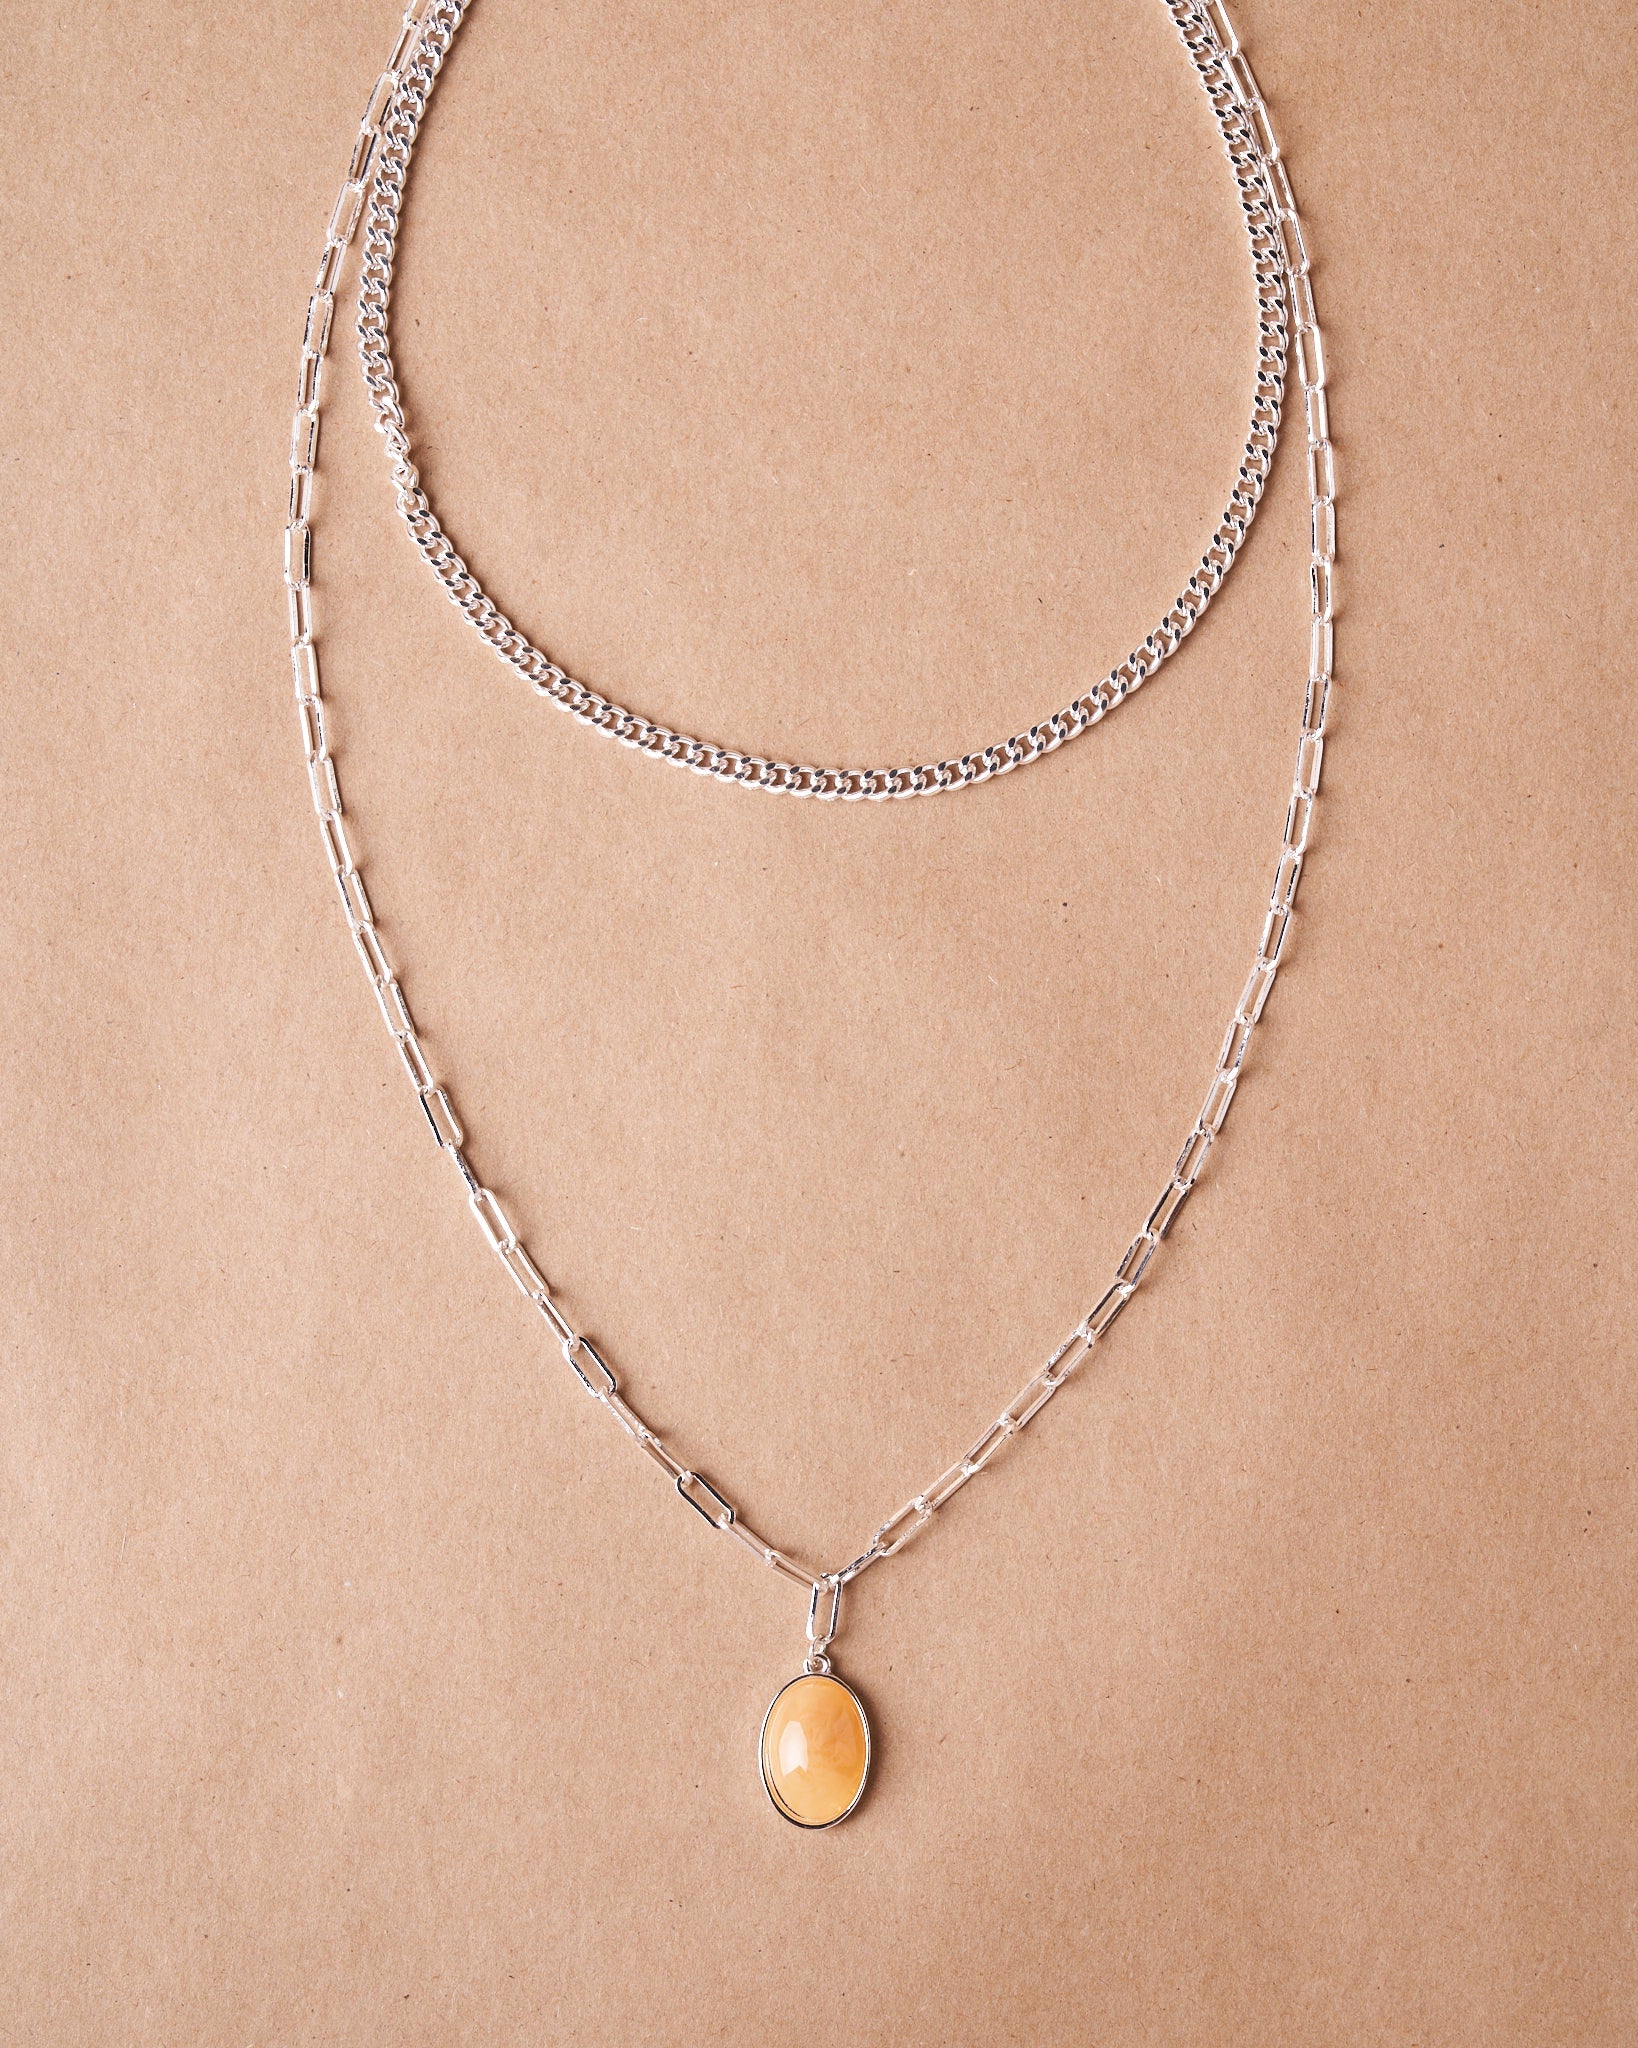 Pina Necklace